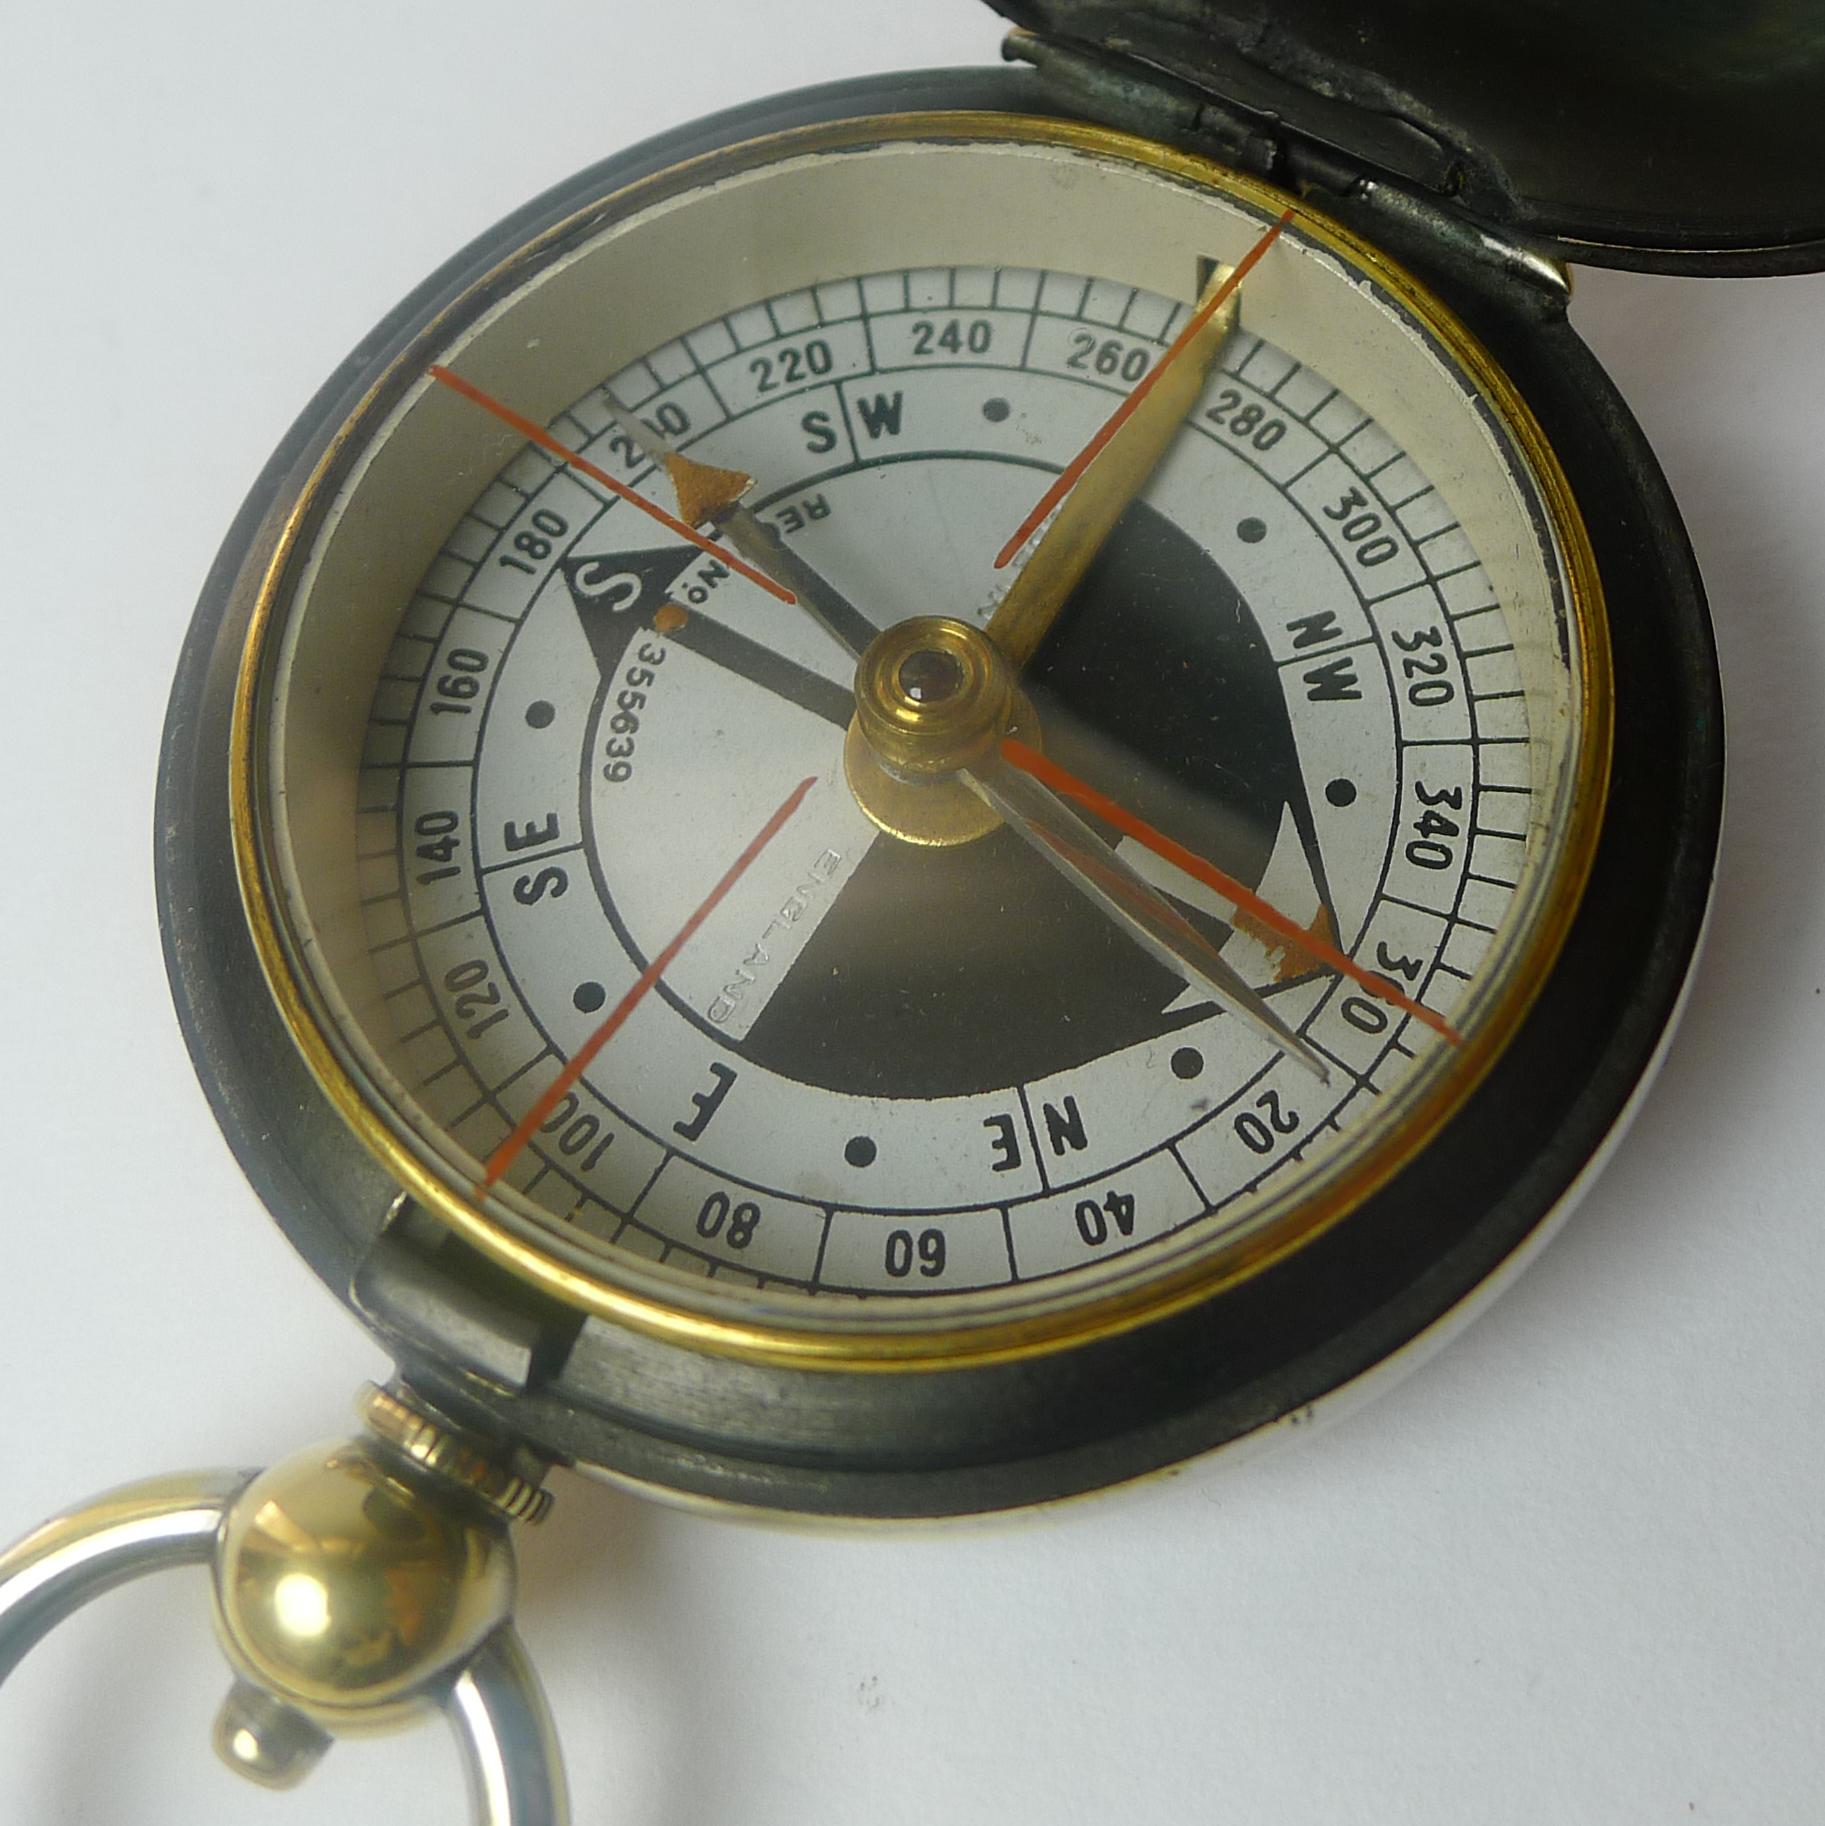 A handsome cased late Victorian or Edwardian compass with hinged lid, the little button on the top used to open; just like a pocket watch.

The case is made from nickel over brass with minor wear commensurate with age and use, professionally cleaned